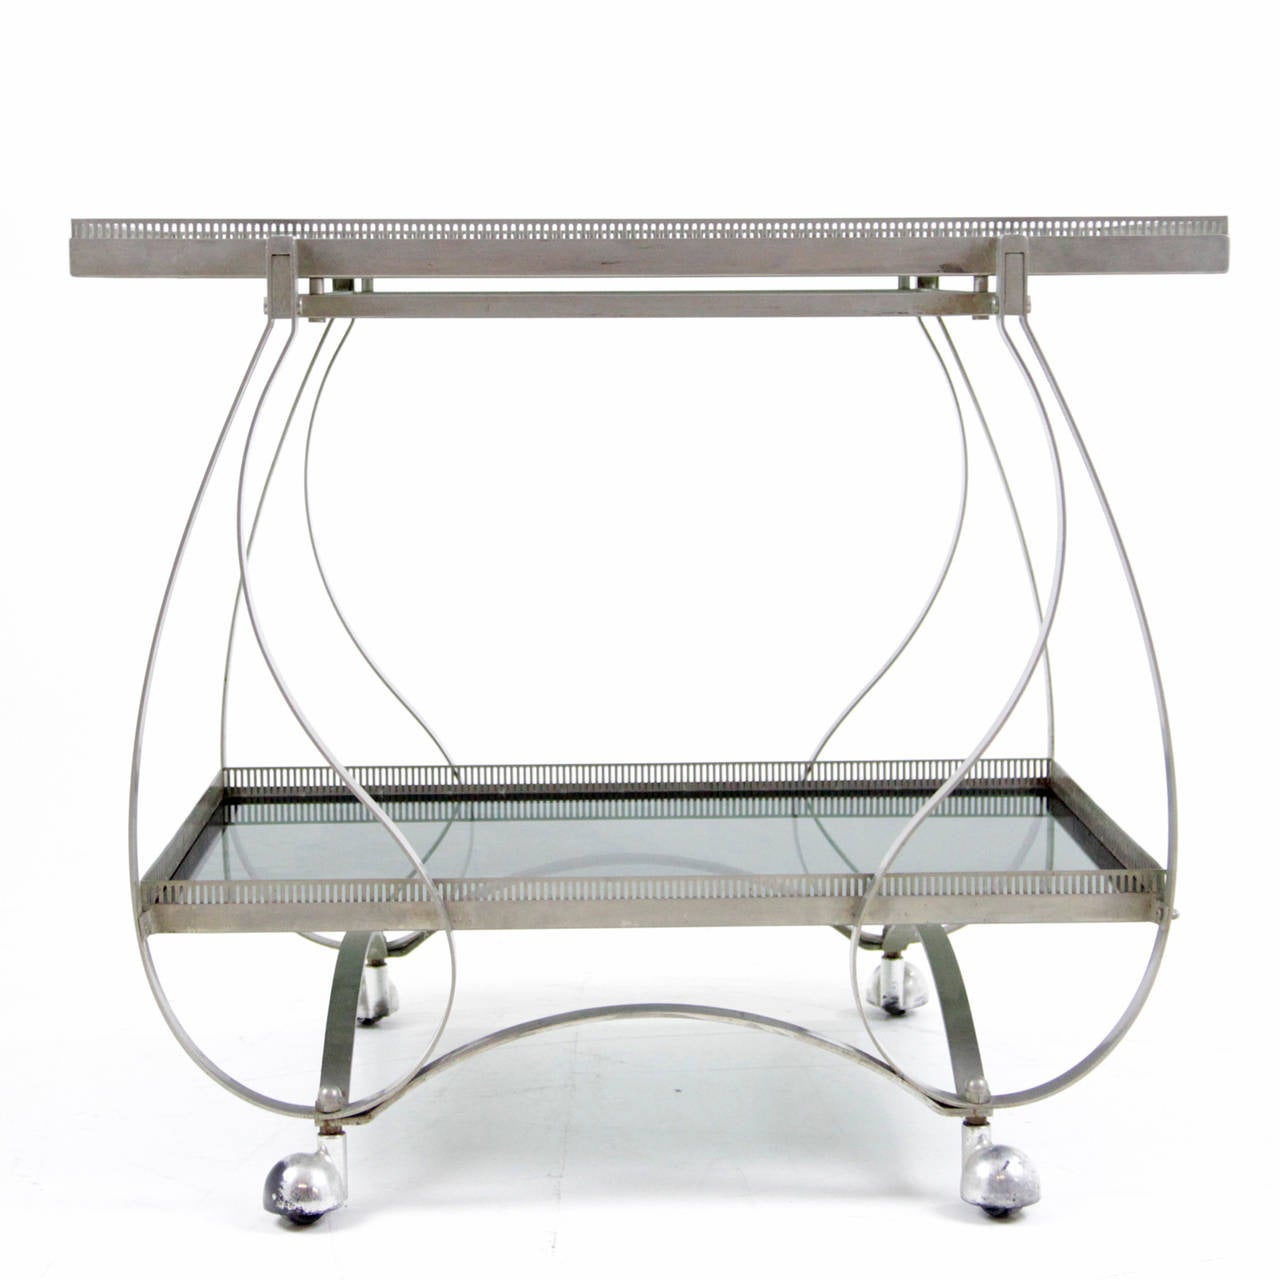 Serving trolley out of iron and with two shelves with a low railing. The framework consists of artfully curved metal ribbons that end on four rolls. 

HxWxD: 25.6 x 29.1 x 19.3 inches..